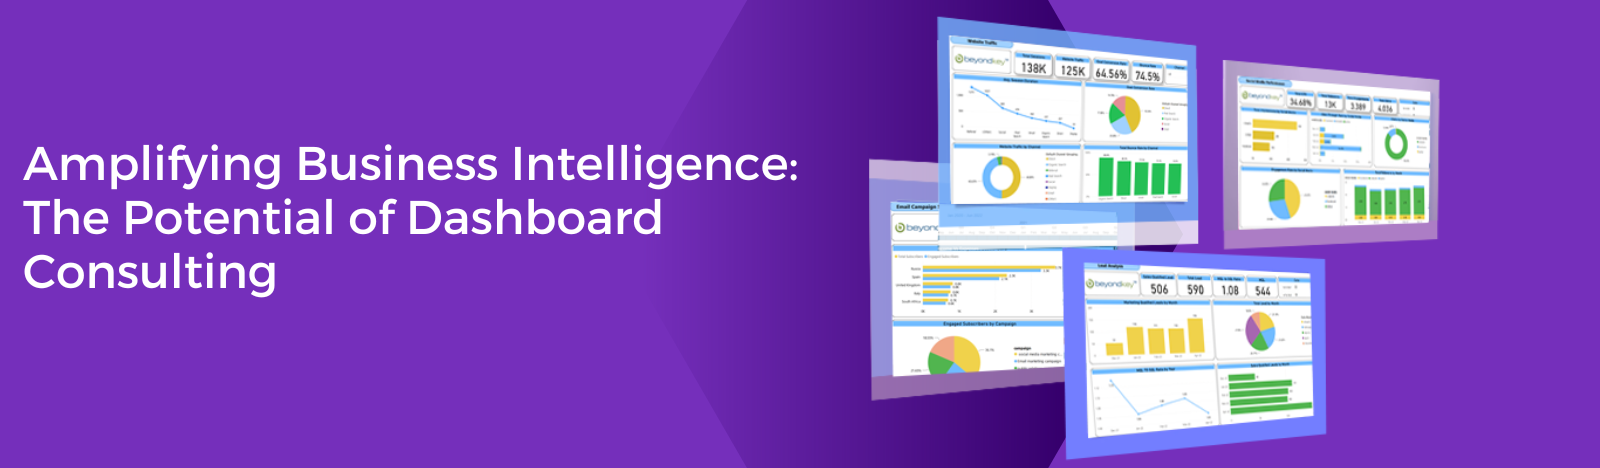 Amplifying Business Intelligence: The Potential of Dashboard Consulting